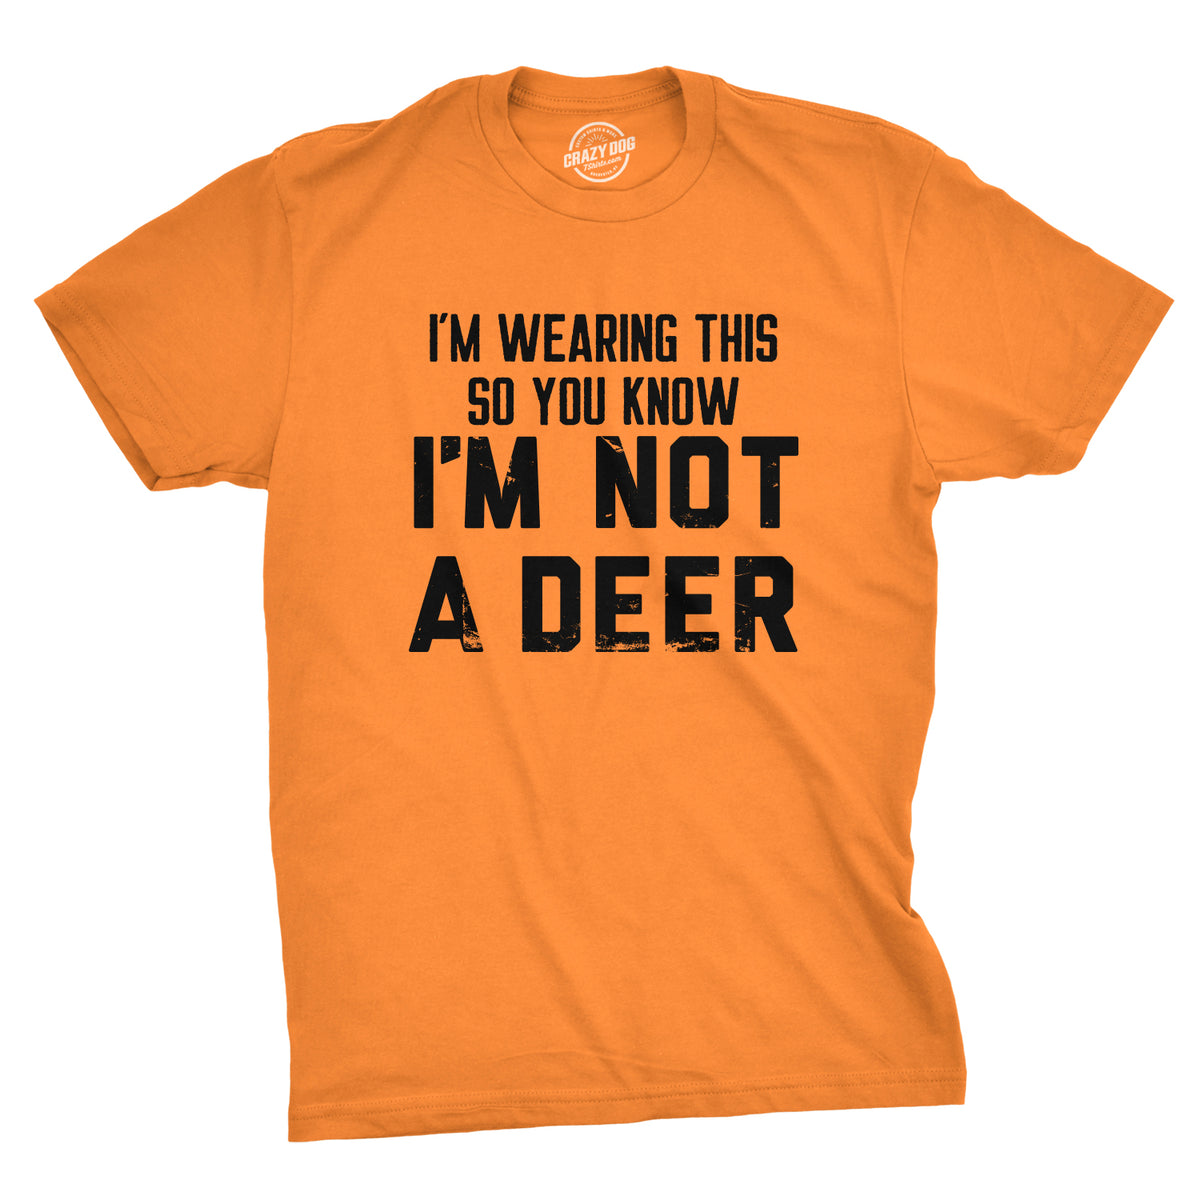 Funny Orange - DEER Im Wearing This So You Know Im Not A Deer Mens T Shirt Nerdy Hunting Sarcastic Tee